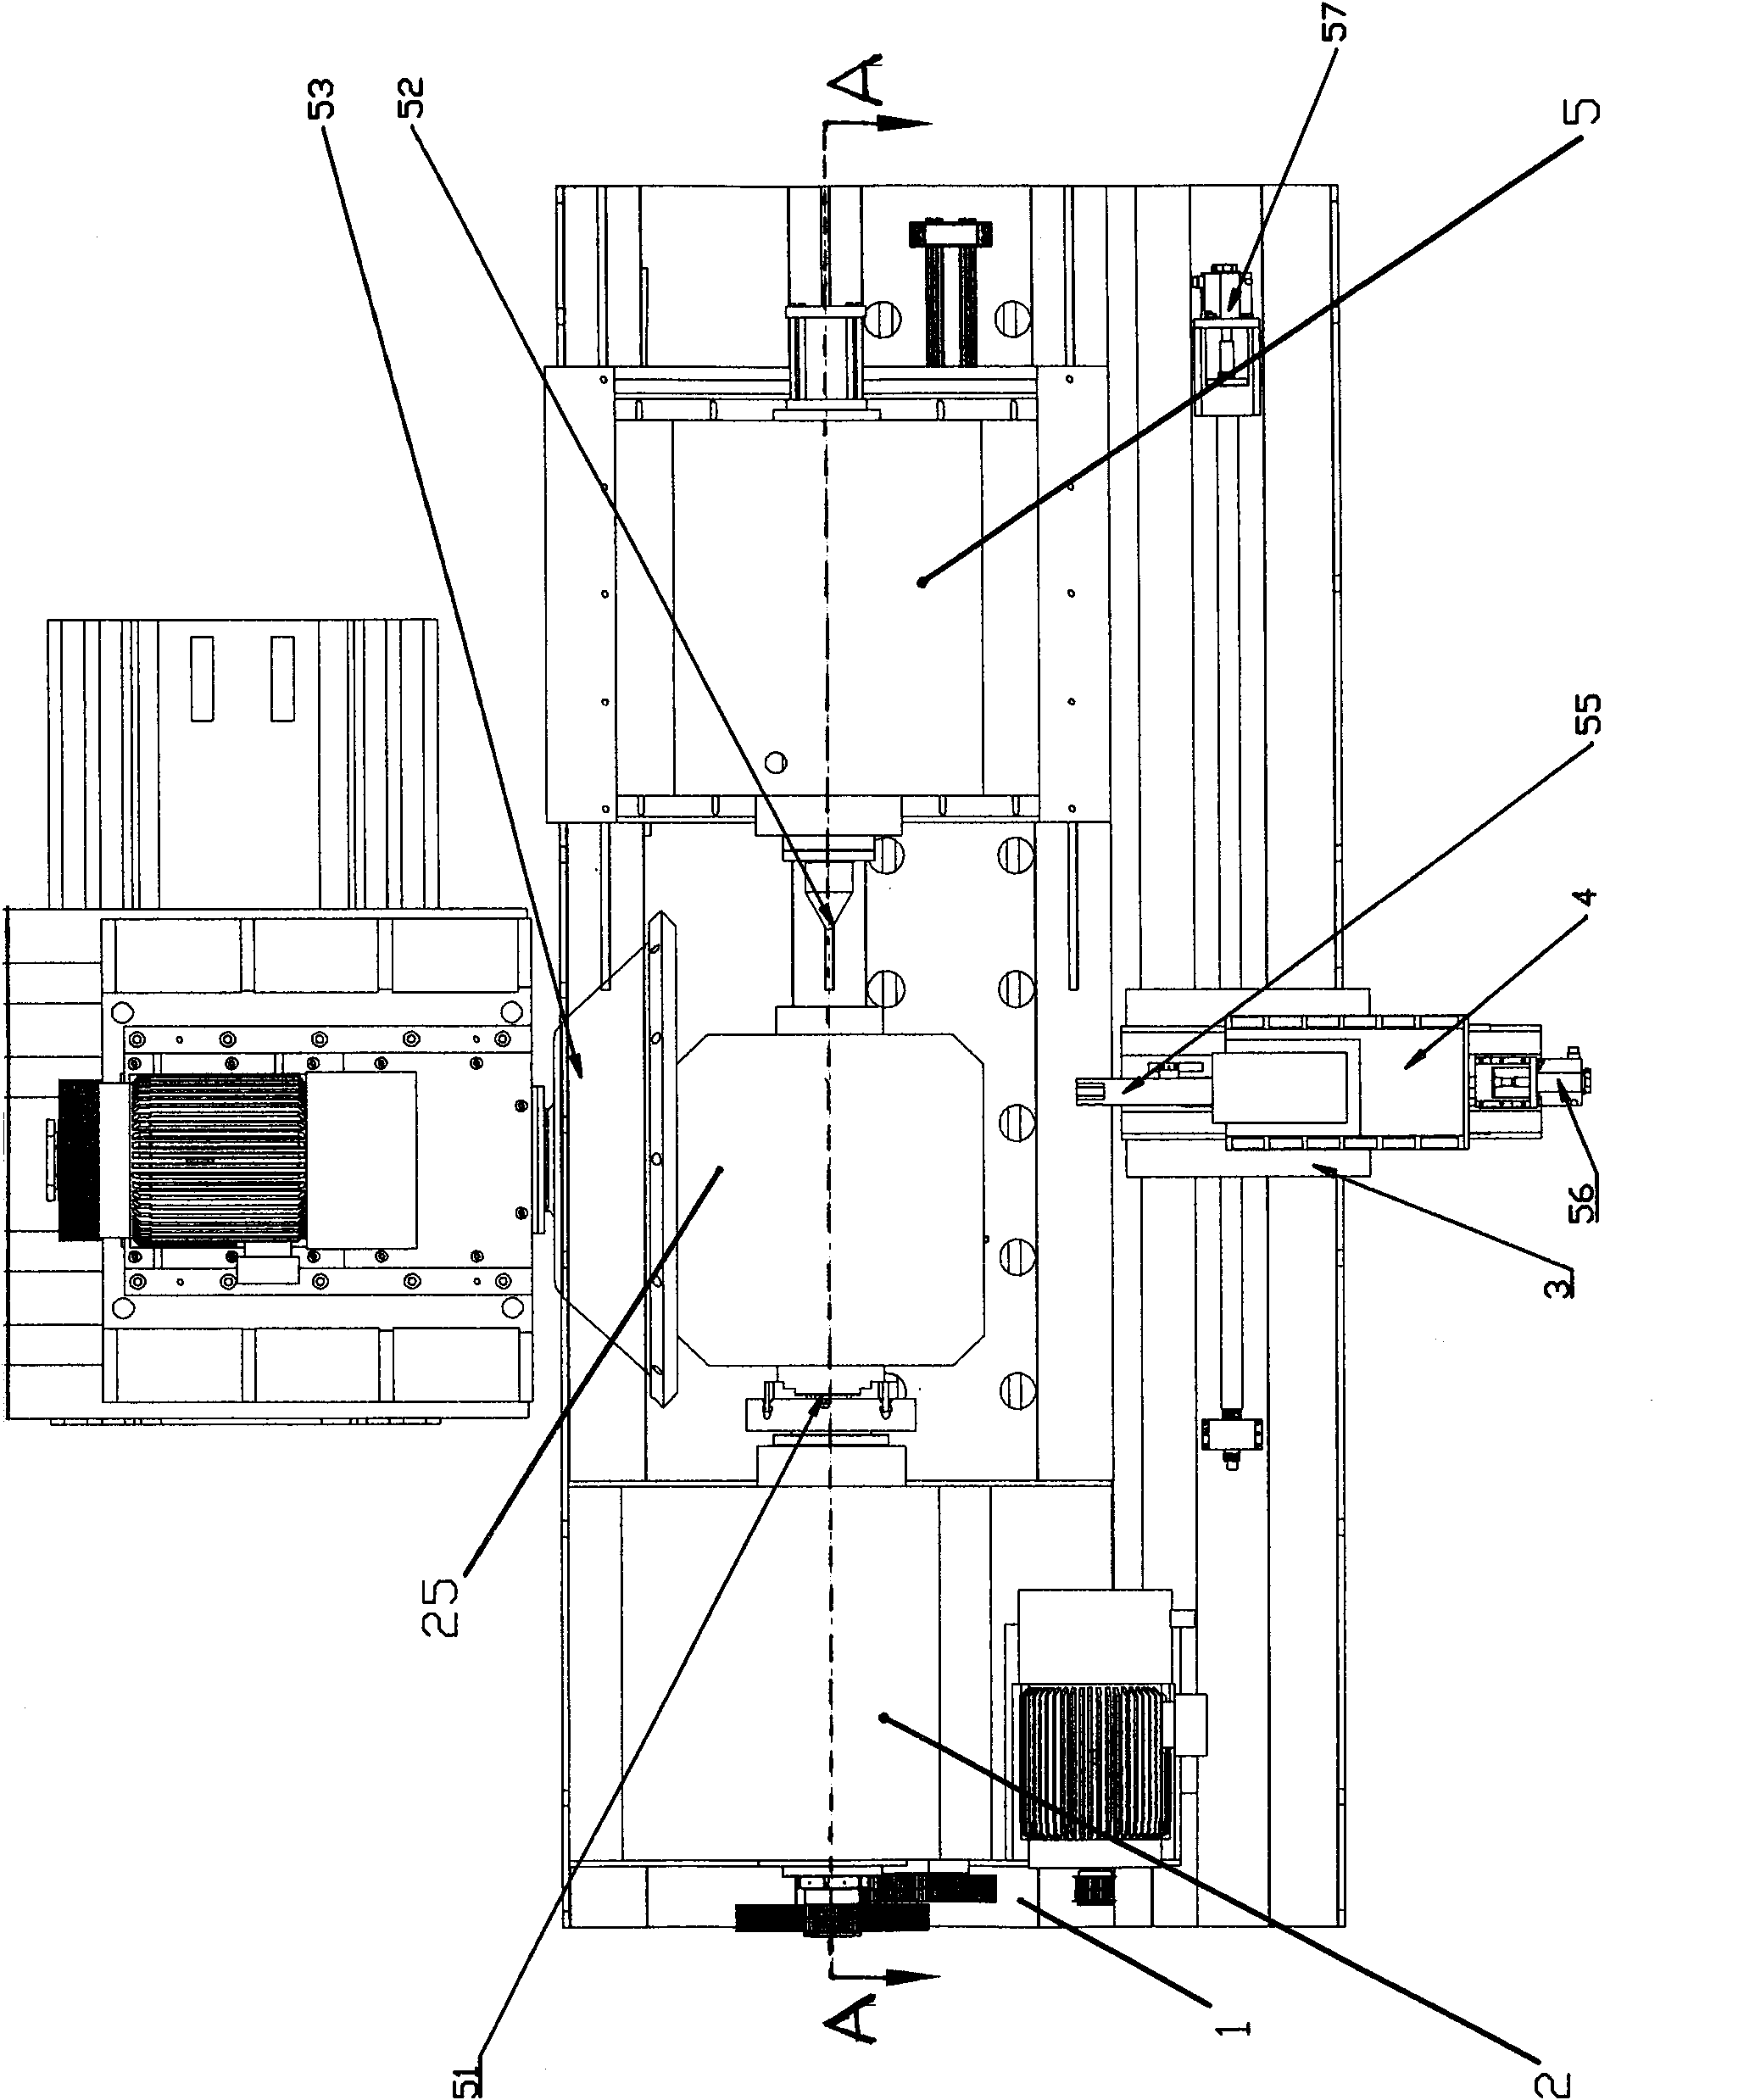 Integrated grinding/turning mechanism of grinding lathe for ball valve bodies